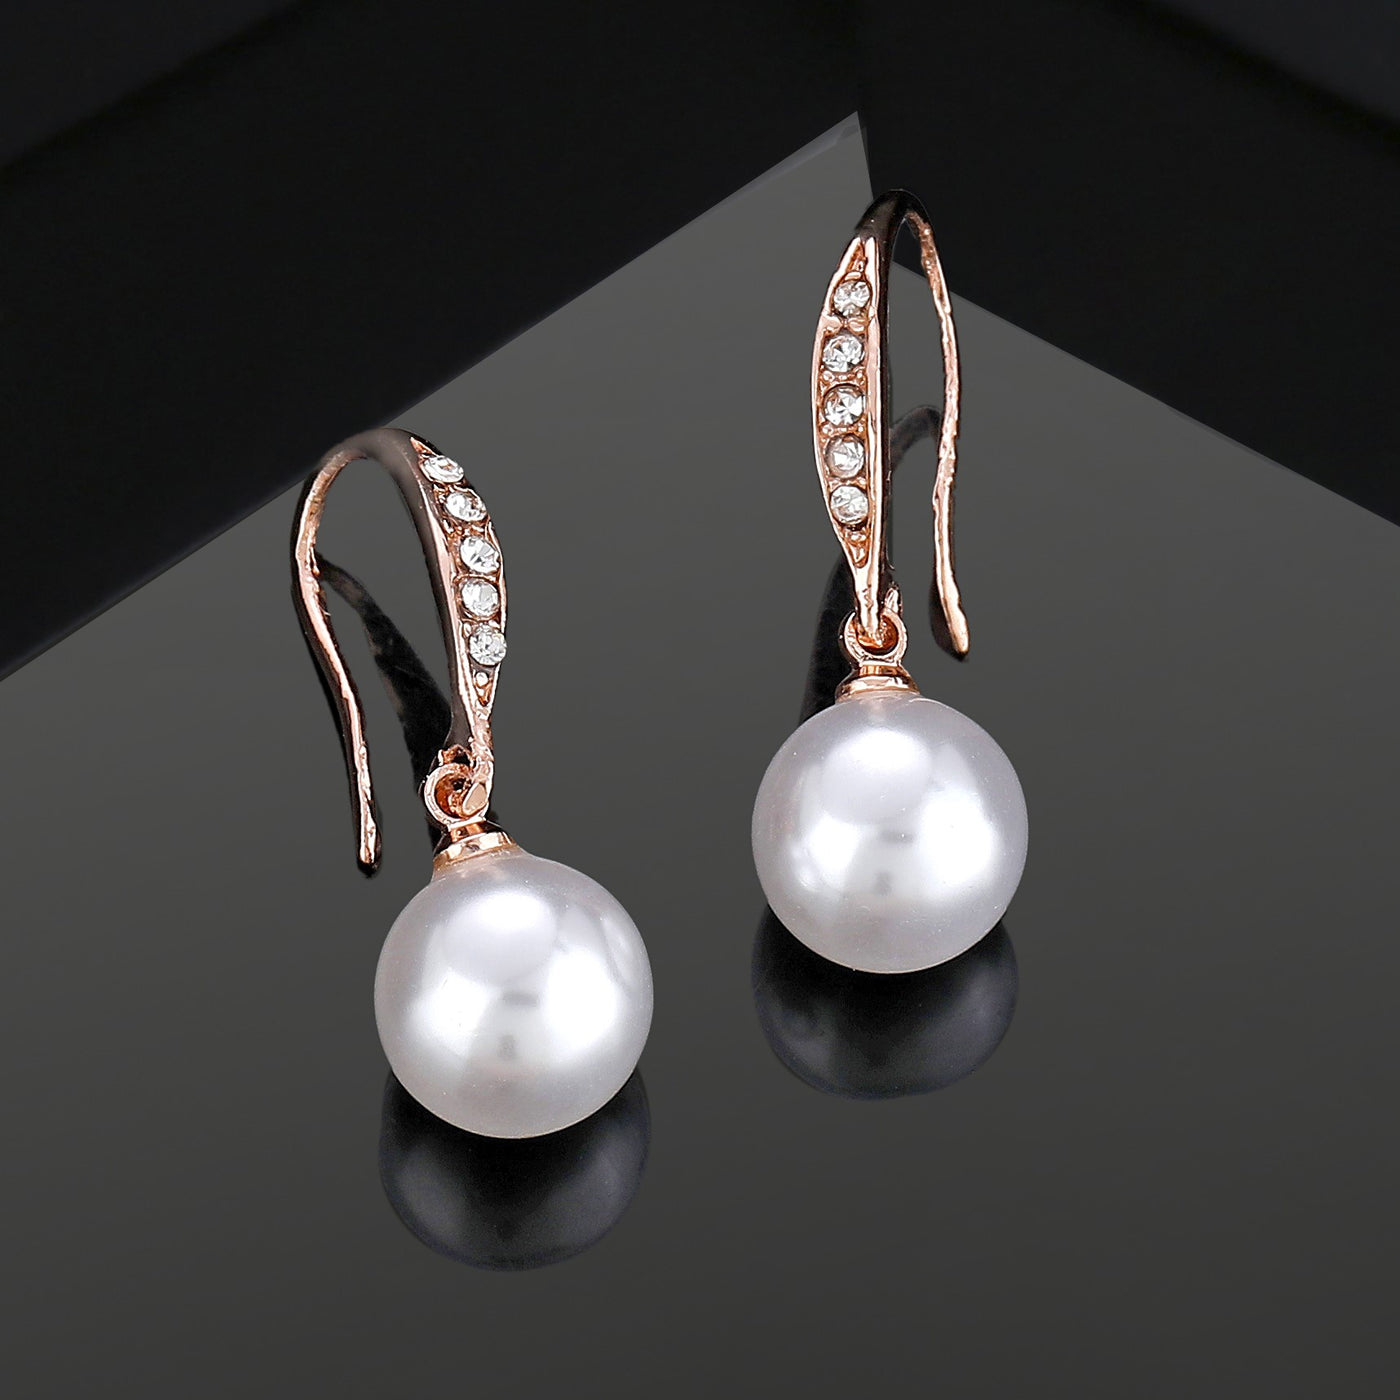 Estele Rose Gold Plated Shining Pearl Drop Earrings with Austrian Crystals for Women